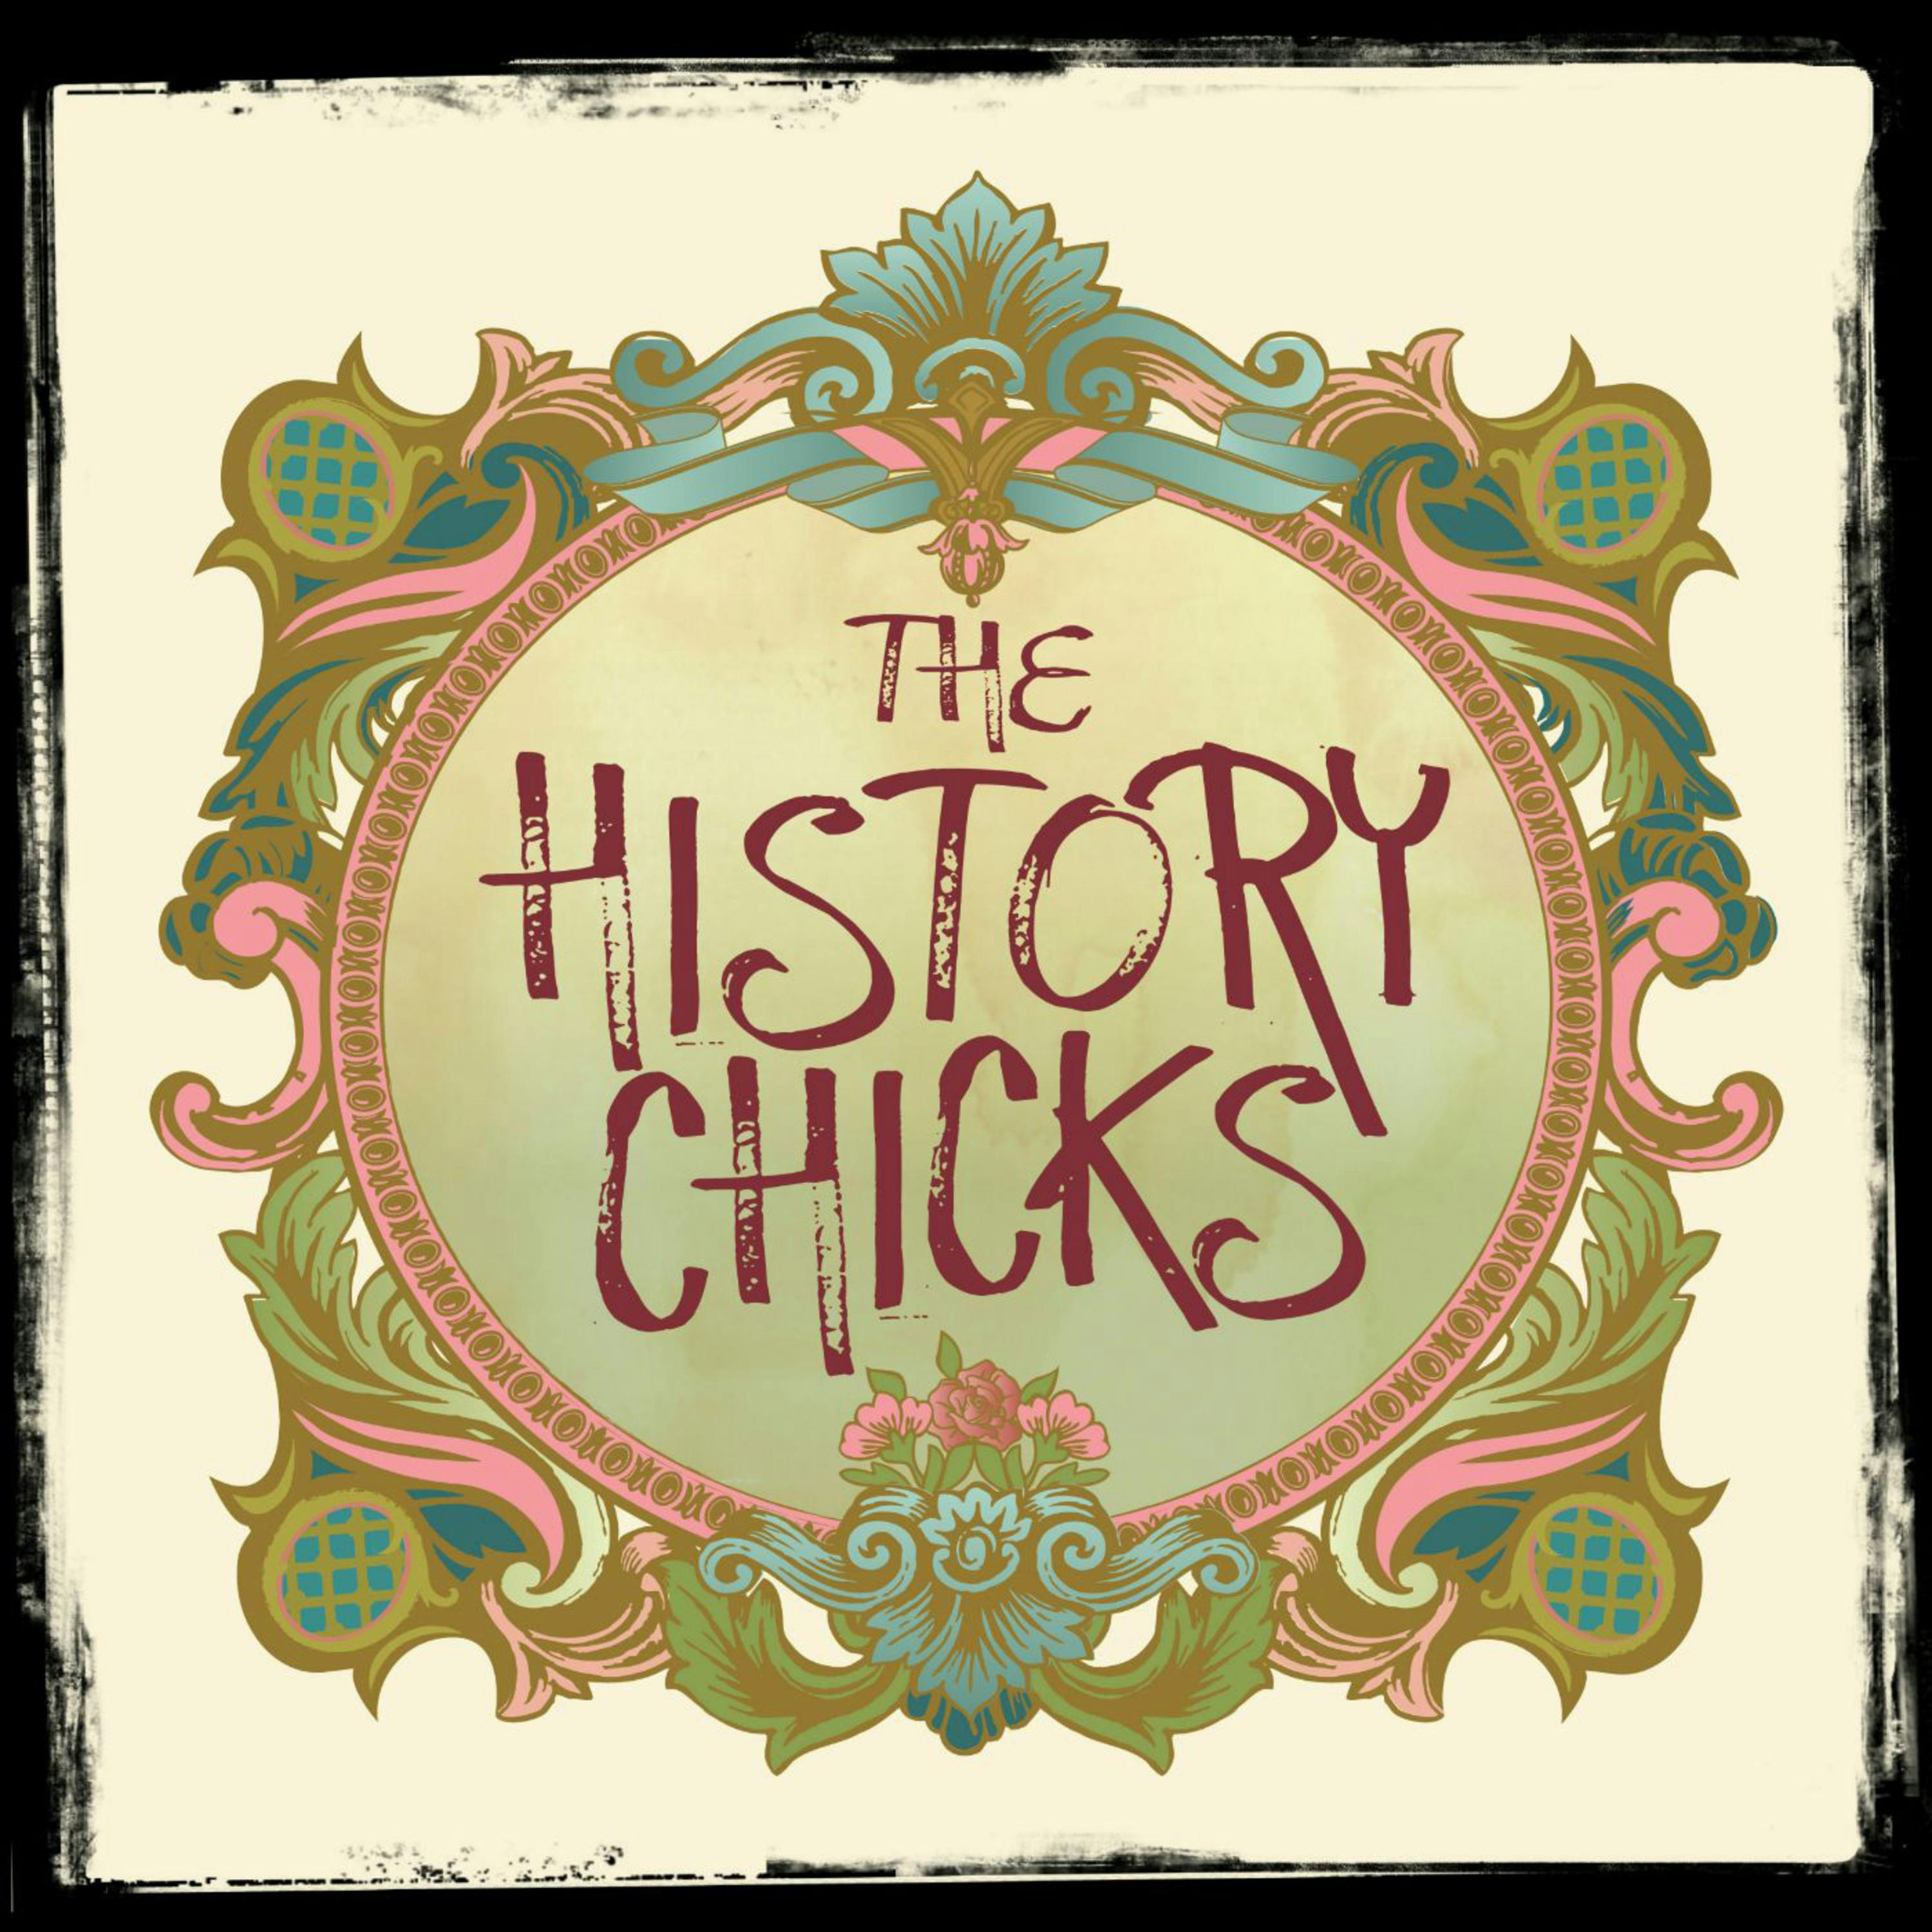 The History Chicks podcast show image